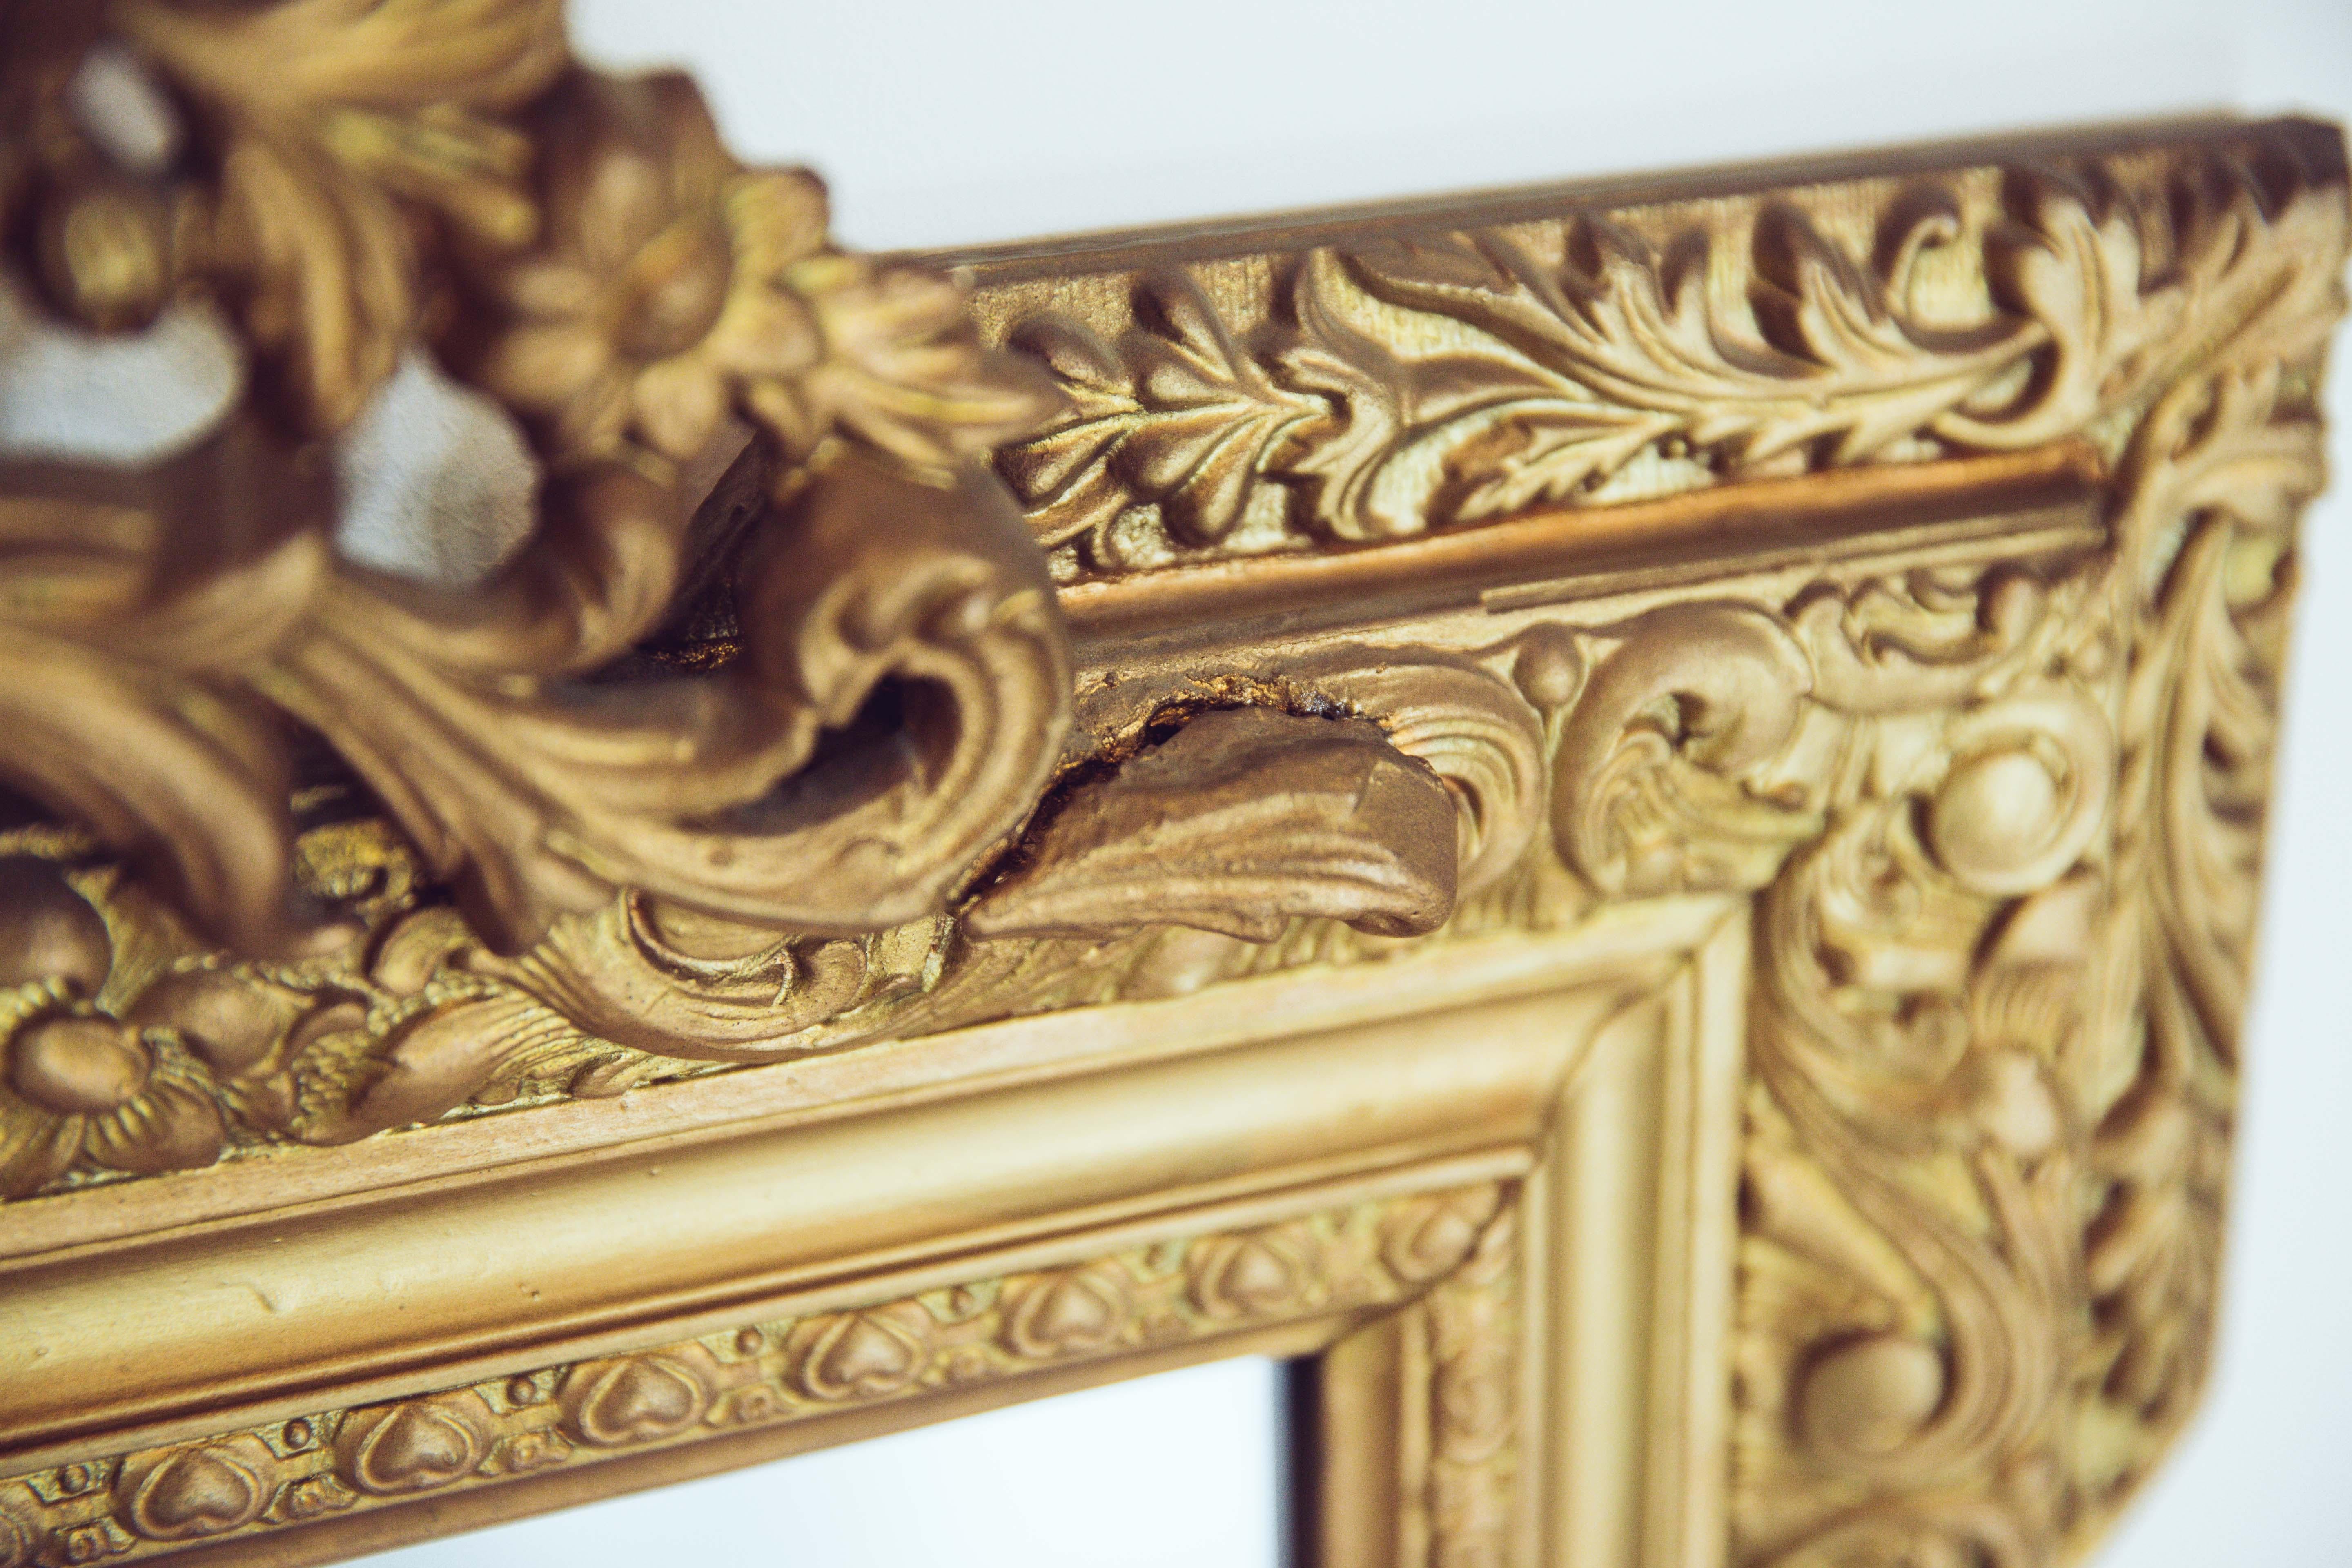 A French antique carved gilded wood mirror with urn crest. The frame displays carved flowers, leaves and little heart details. With four accented ornate corners.